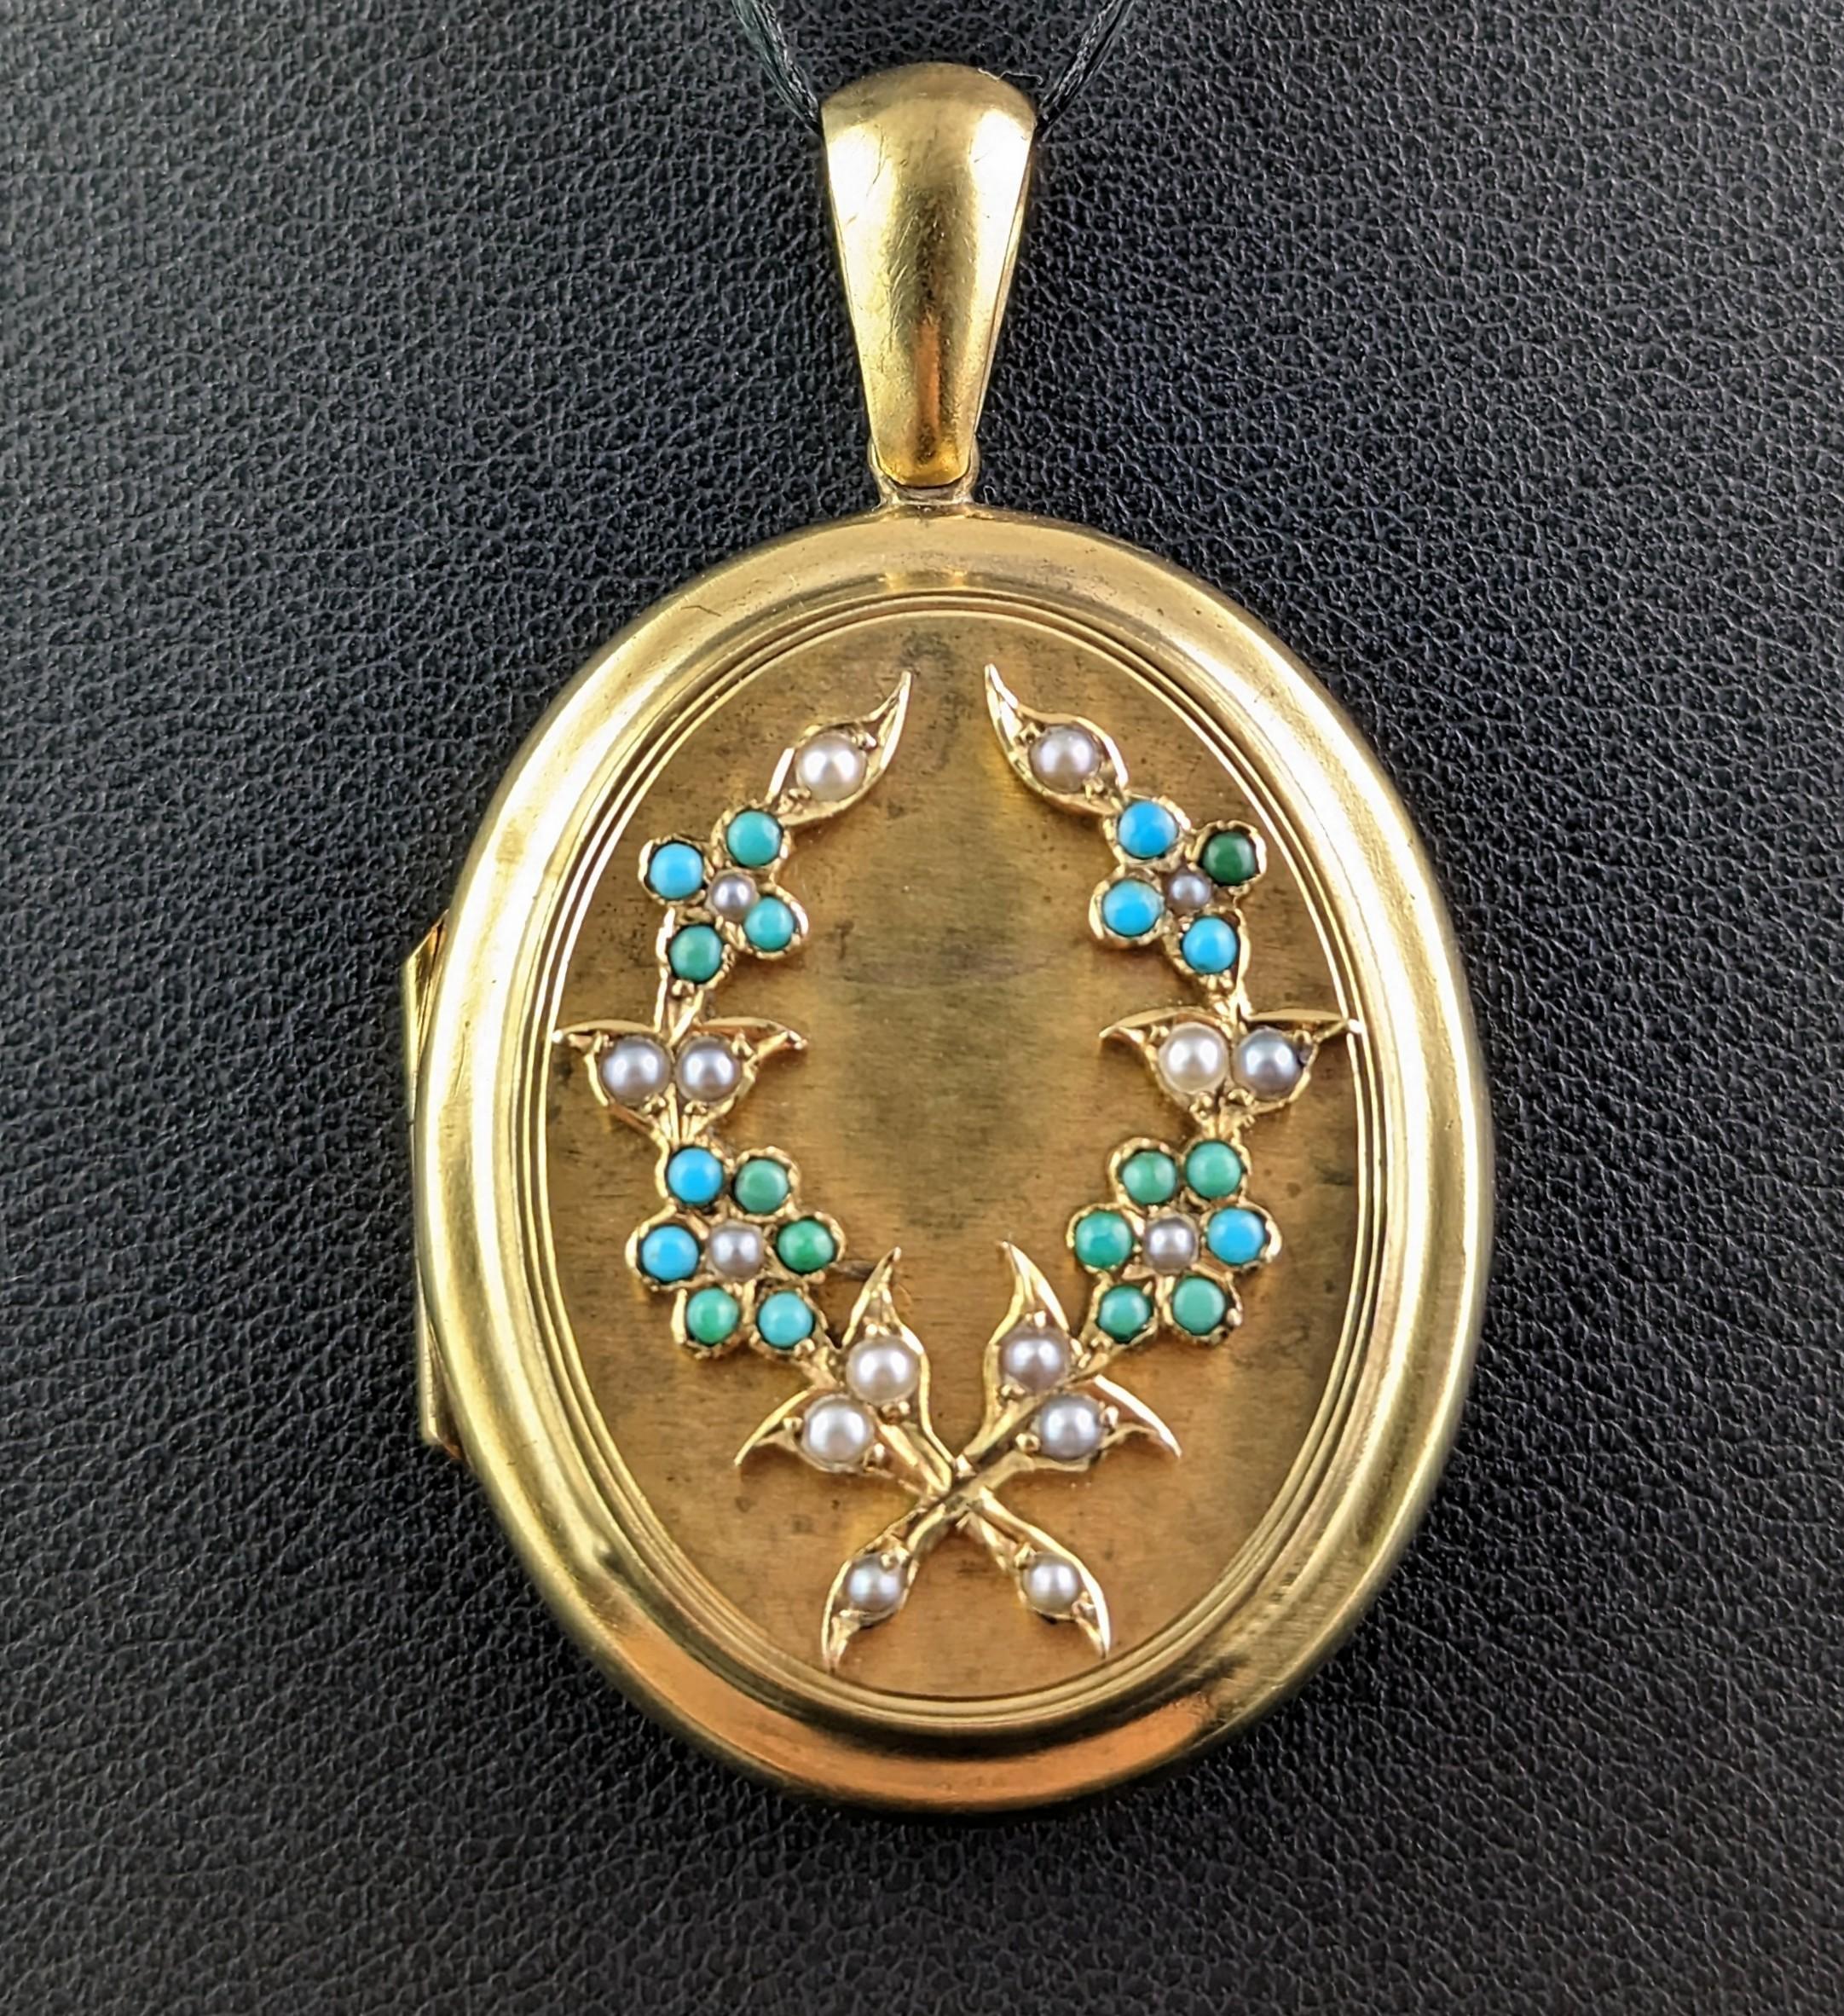 This beautiful antique 15kt gold, Turquoise and Pearl locket is really a very special and sentimental piece.

Rich aged 15kt yellow gold with a pretty wreath of forget me not flowers to the front adorned with tiny, creamy seed pearls and lush